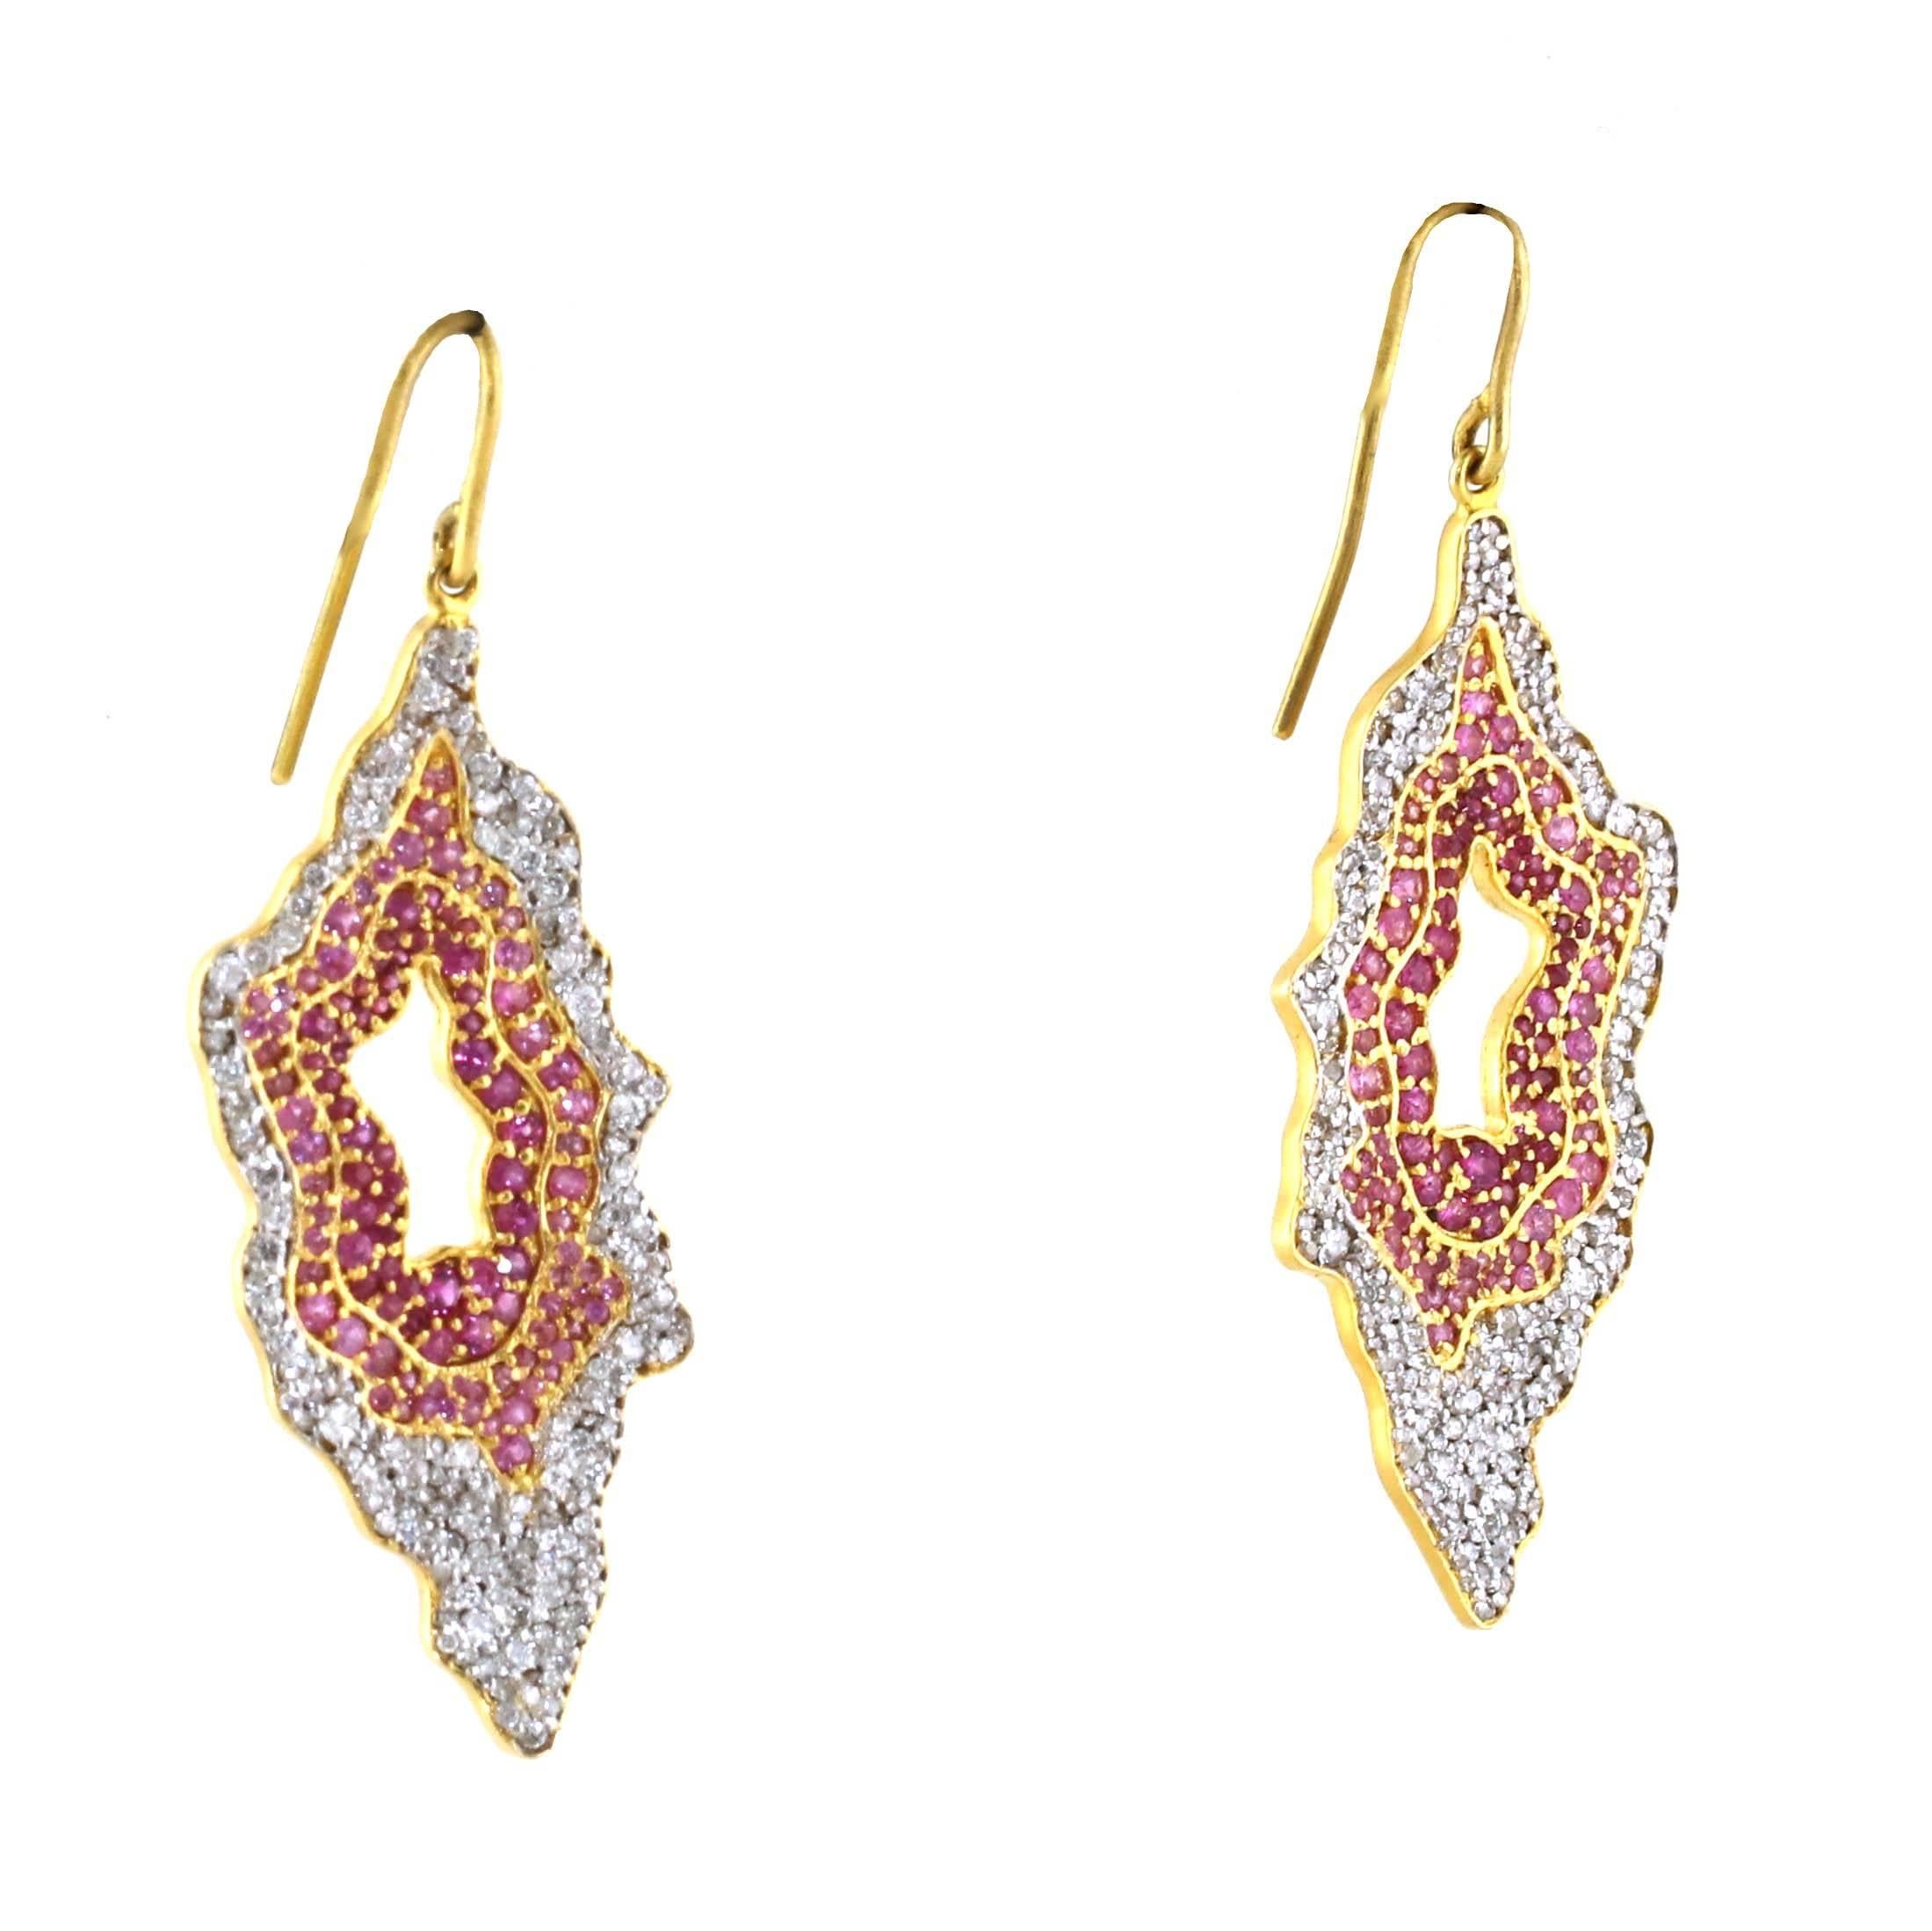 Rare and unique pair of pink sapphire and white diamond geode shaped earrings. Over 1.40 carats of white diamonds set among bright pink sapphires. These are made in 18kt yellow gold making them much finer than a pair of 14kt gold earrings. 

